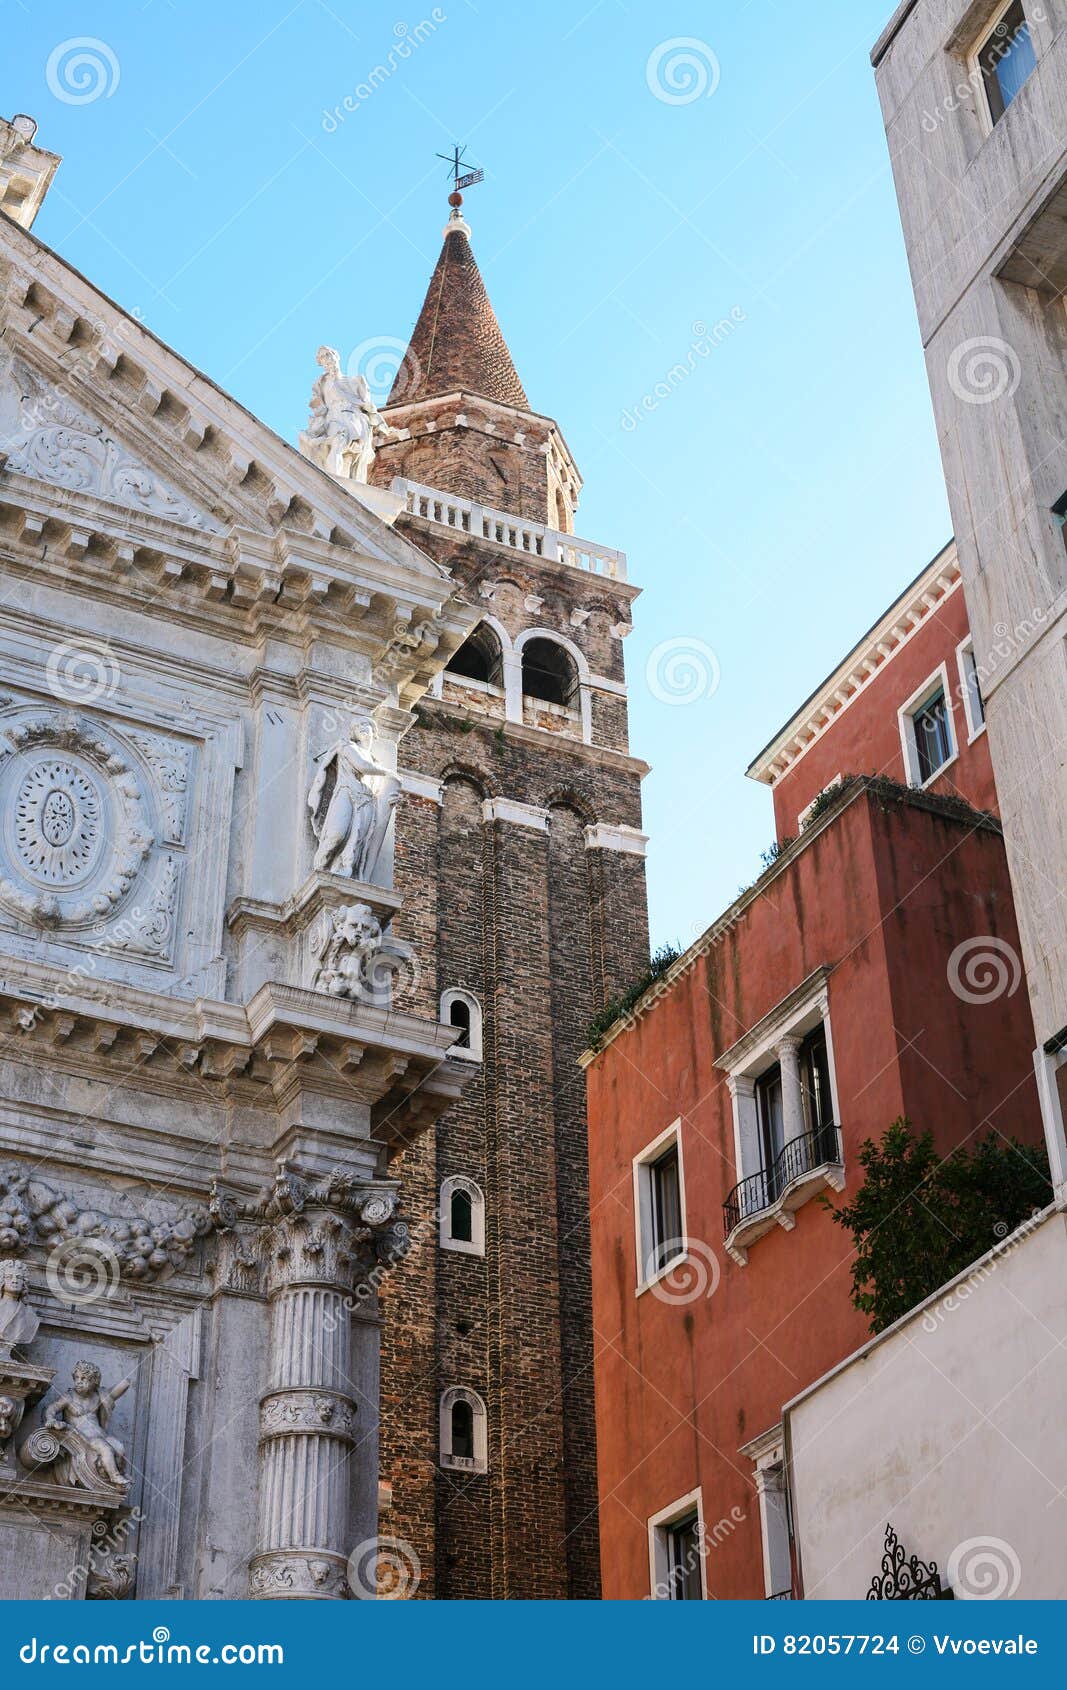 church, houses and campanile tower in venice